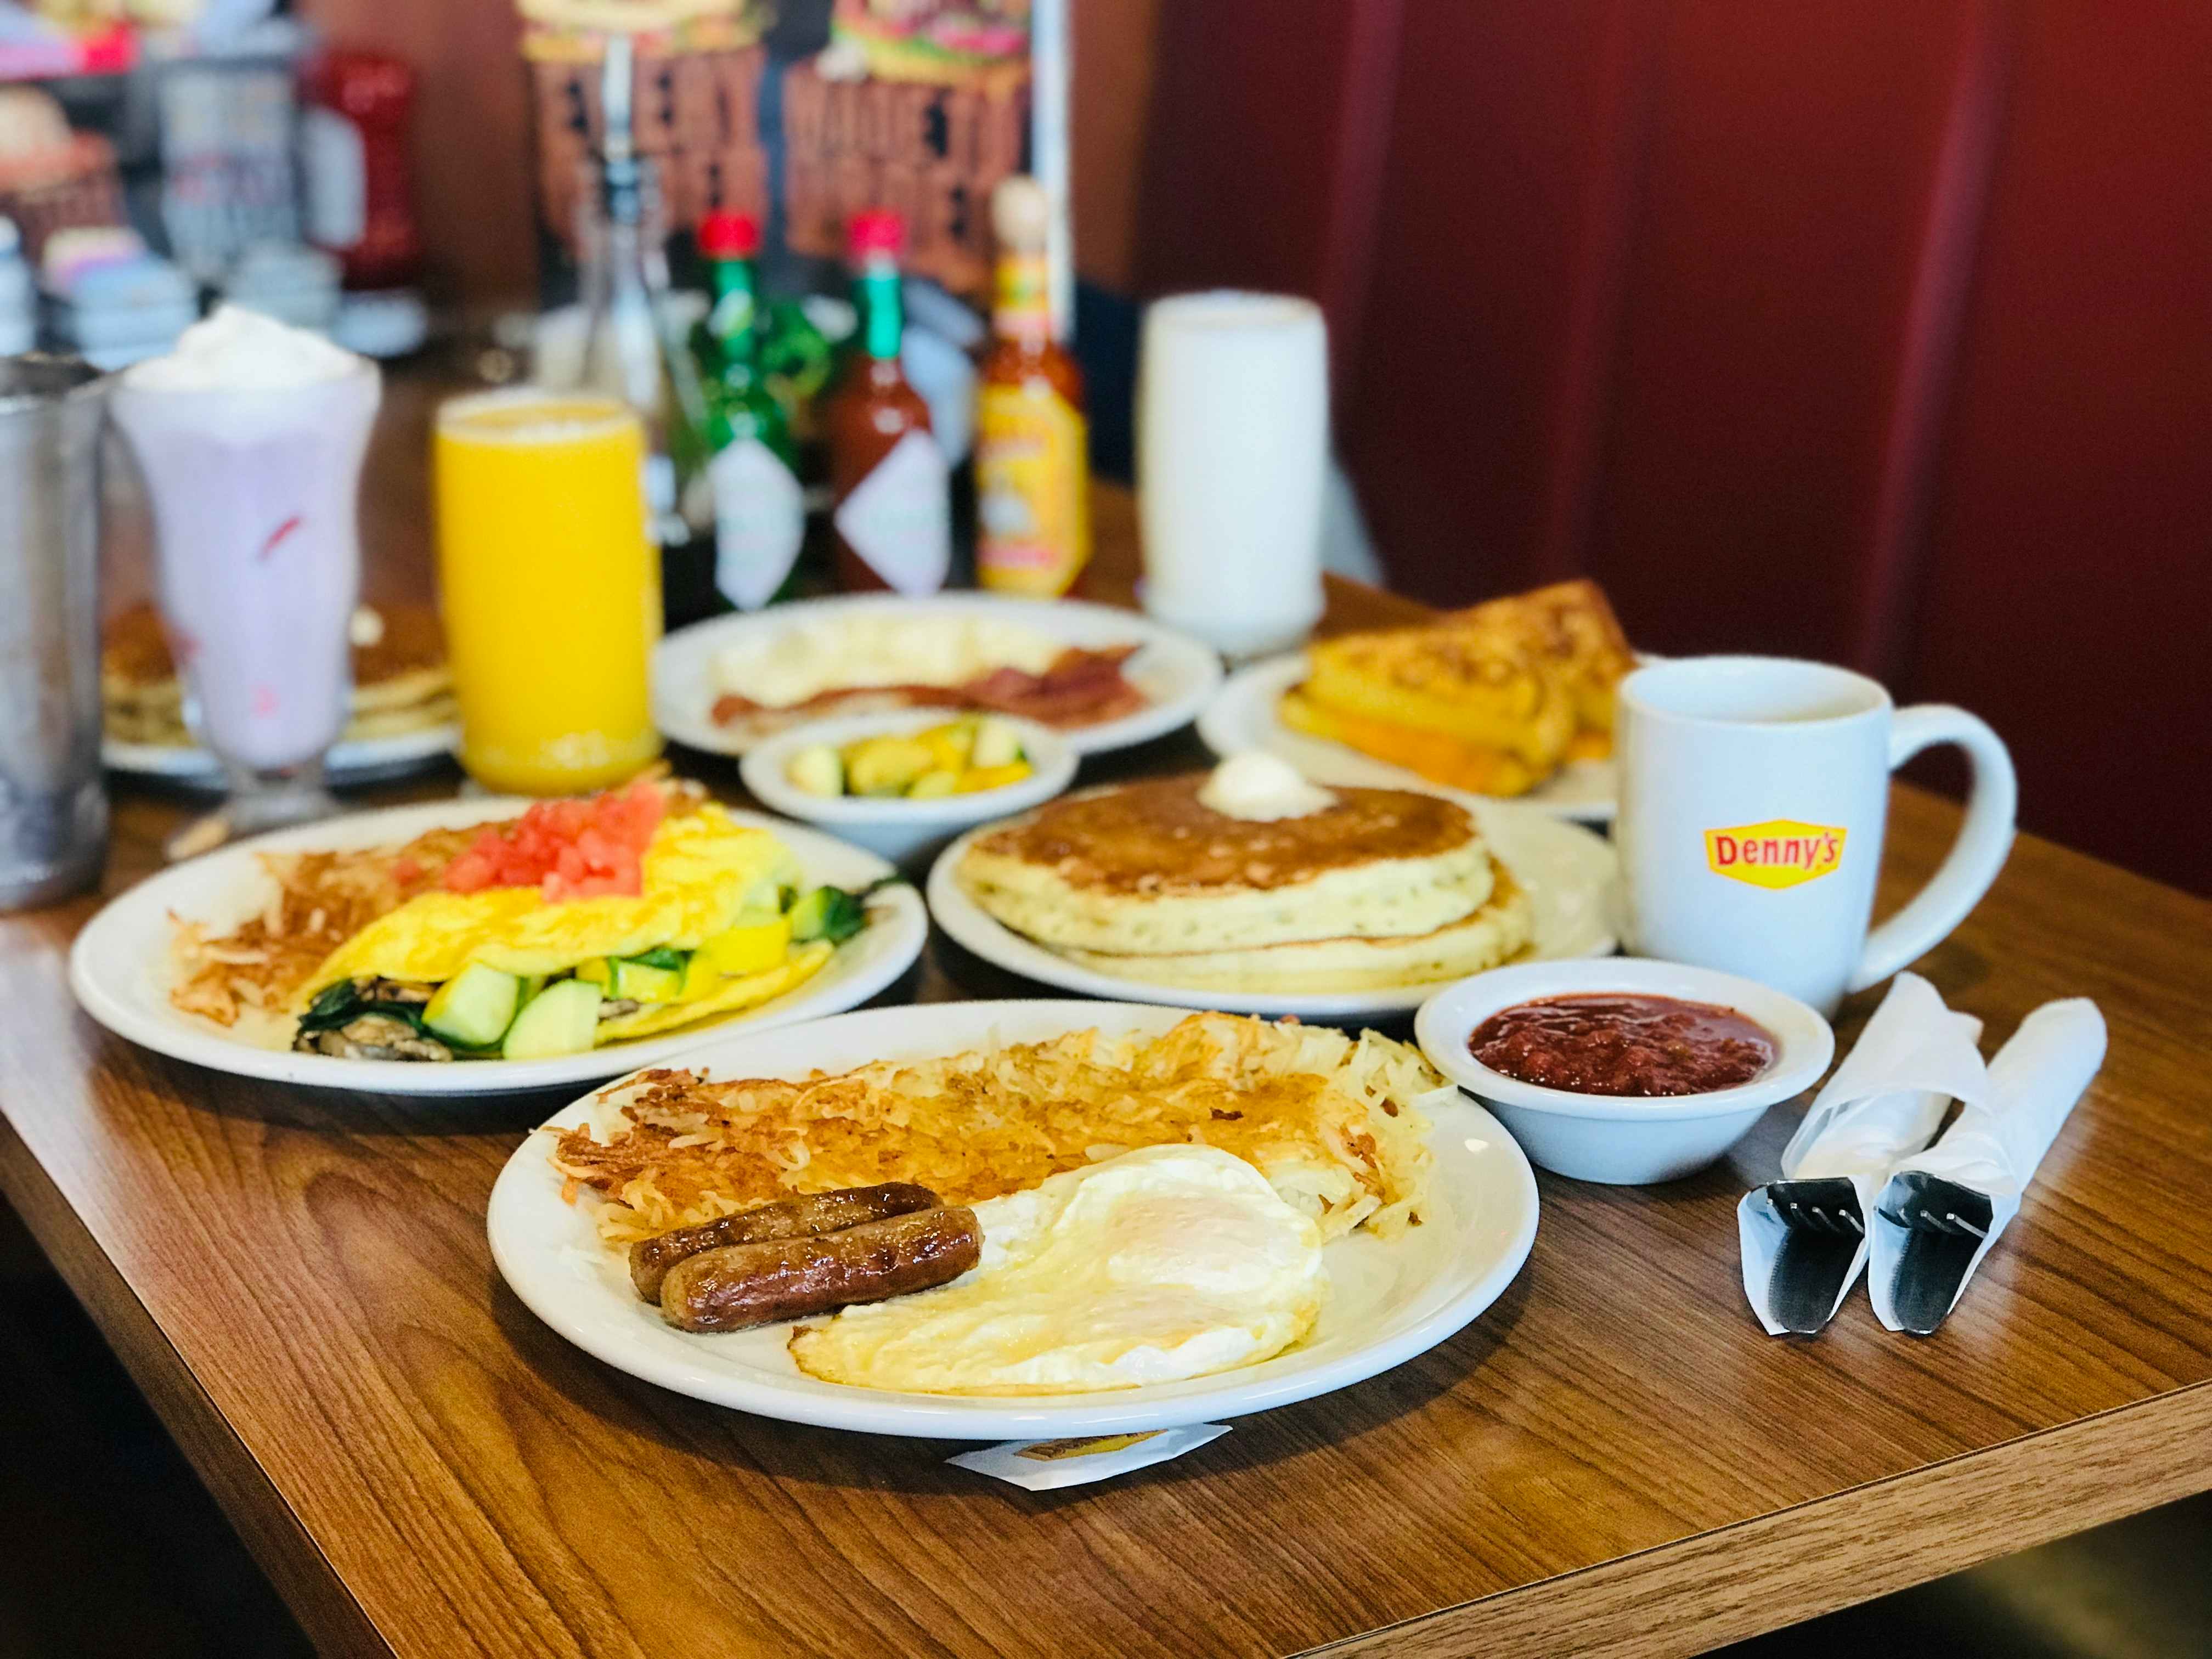 A served table at Denny's with several items including a plate with eggs, sausage, and hash browns, a plate of an omelette and hash browns, a plate with grilled cheese, a plate with eggs and bacon, a plate with pancakes, a glass of orange juice, a milkshake, a coffee mug, silverware wrapped in napkins, and condiments.